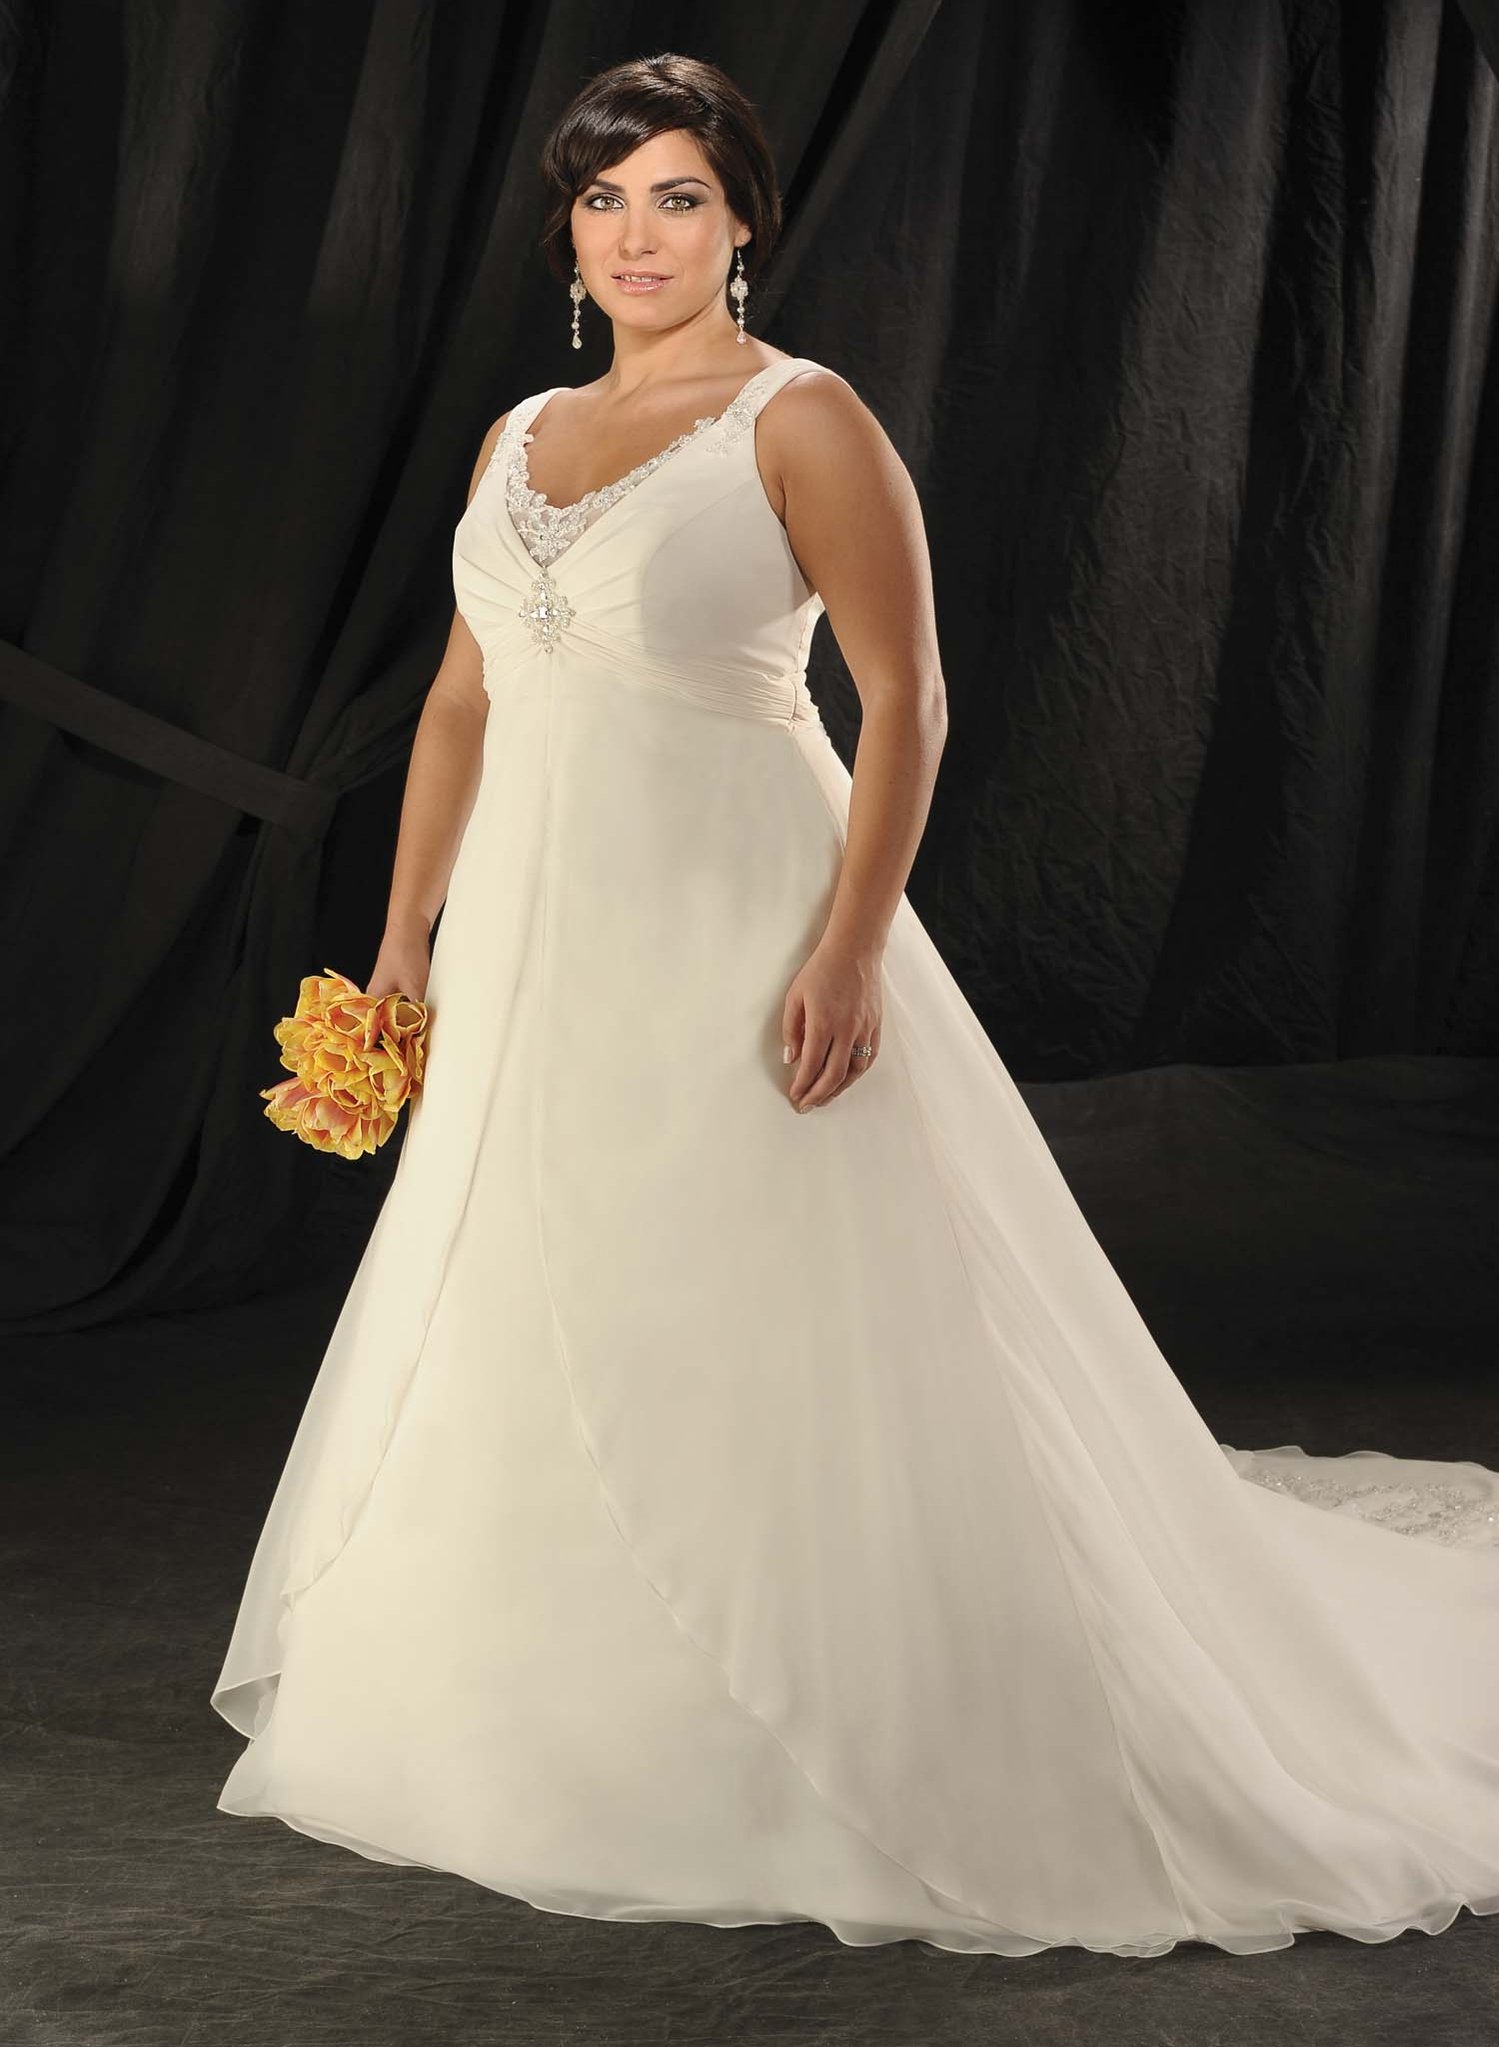 Plus Size Wedding Dresses - Beautiful Looks for Women with Curves - Ohh ...